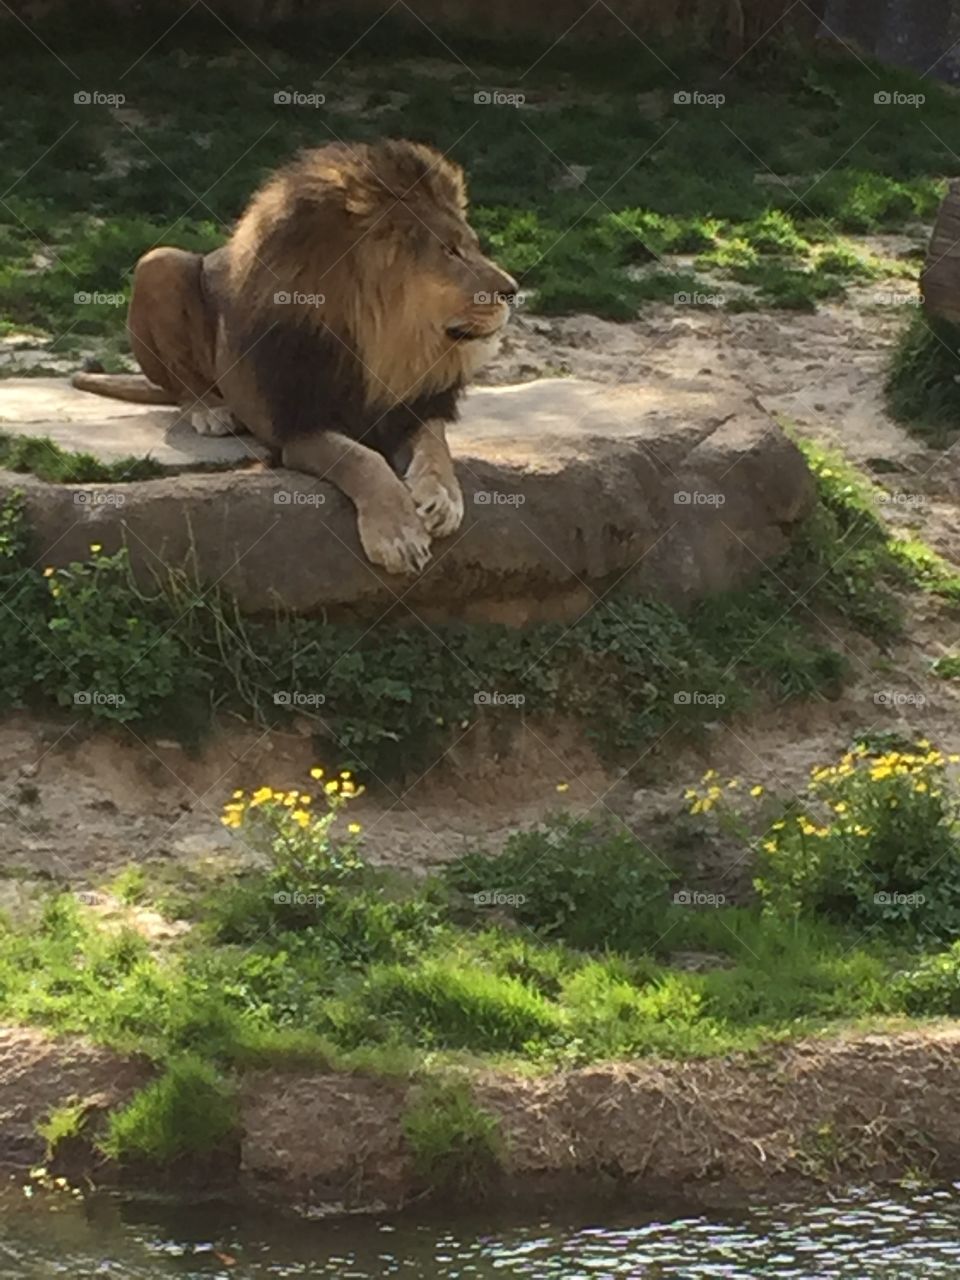 Male lion at the Memphis Zoo